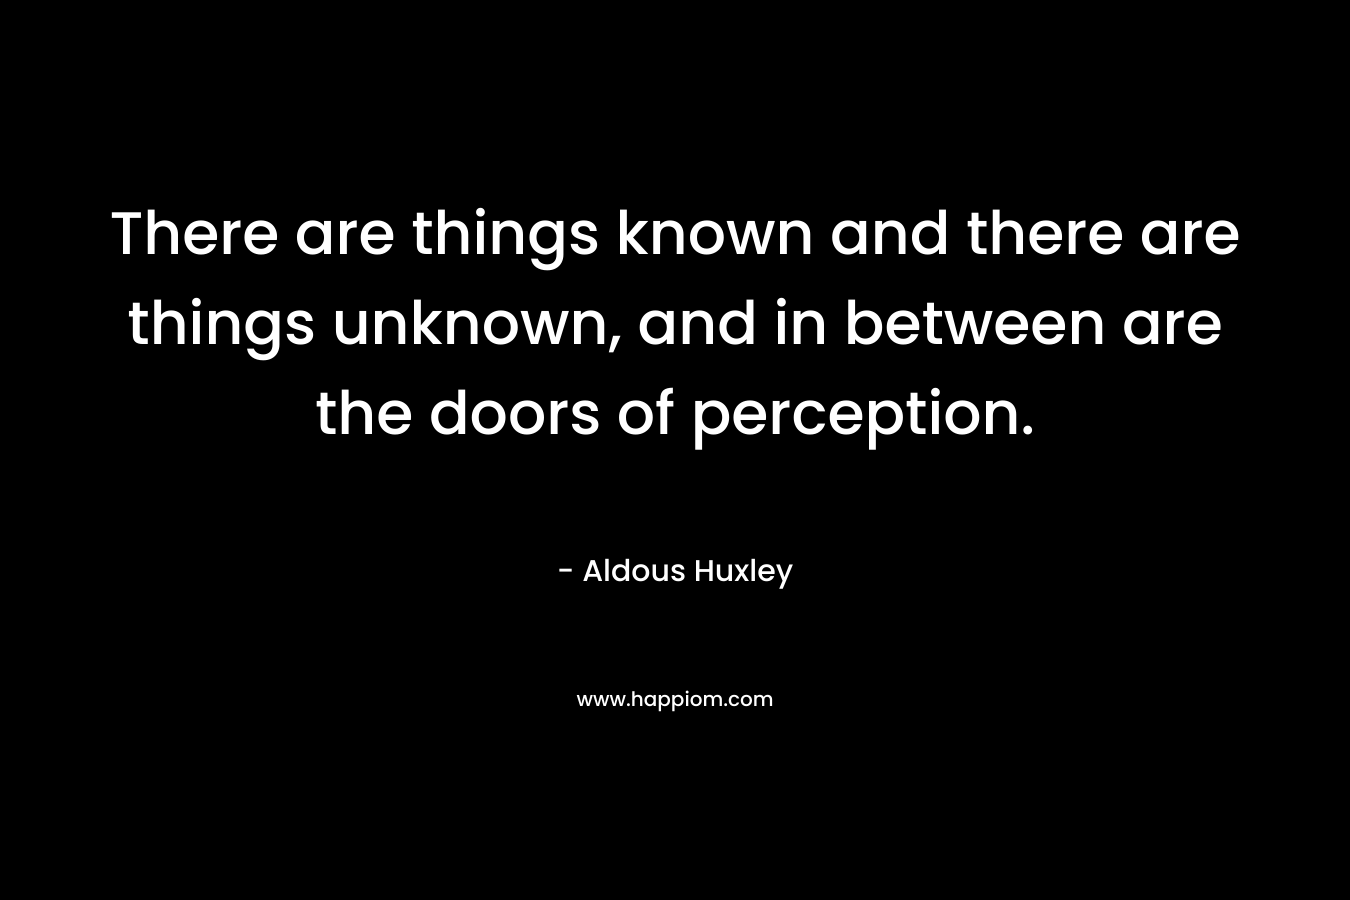 There are things known and there are things unknown, and in between are the doors of perception. – Aldous Huxley